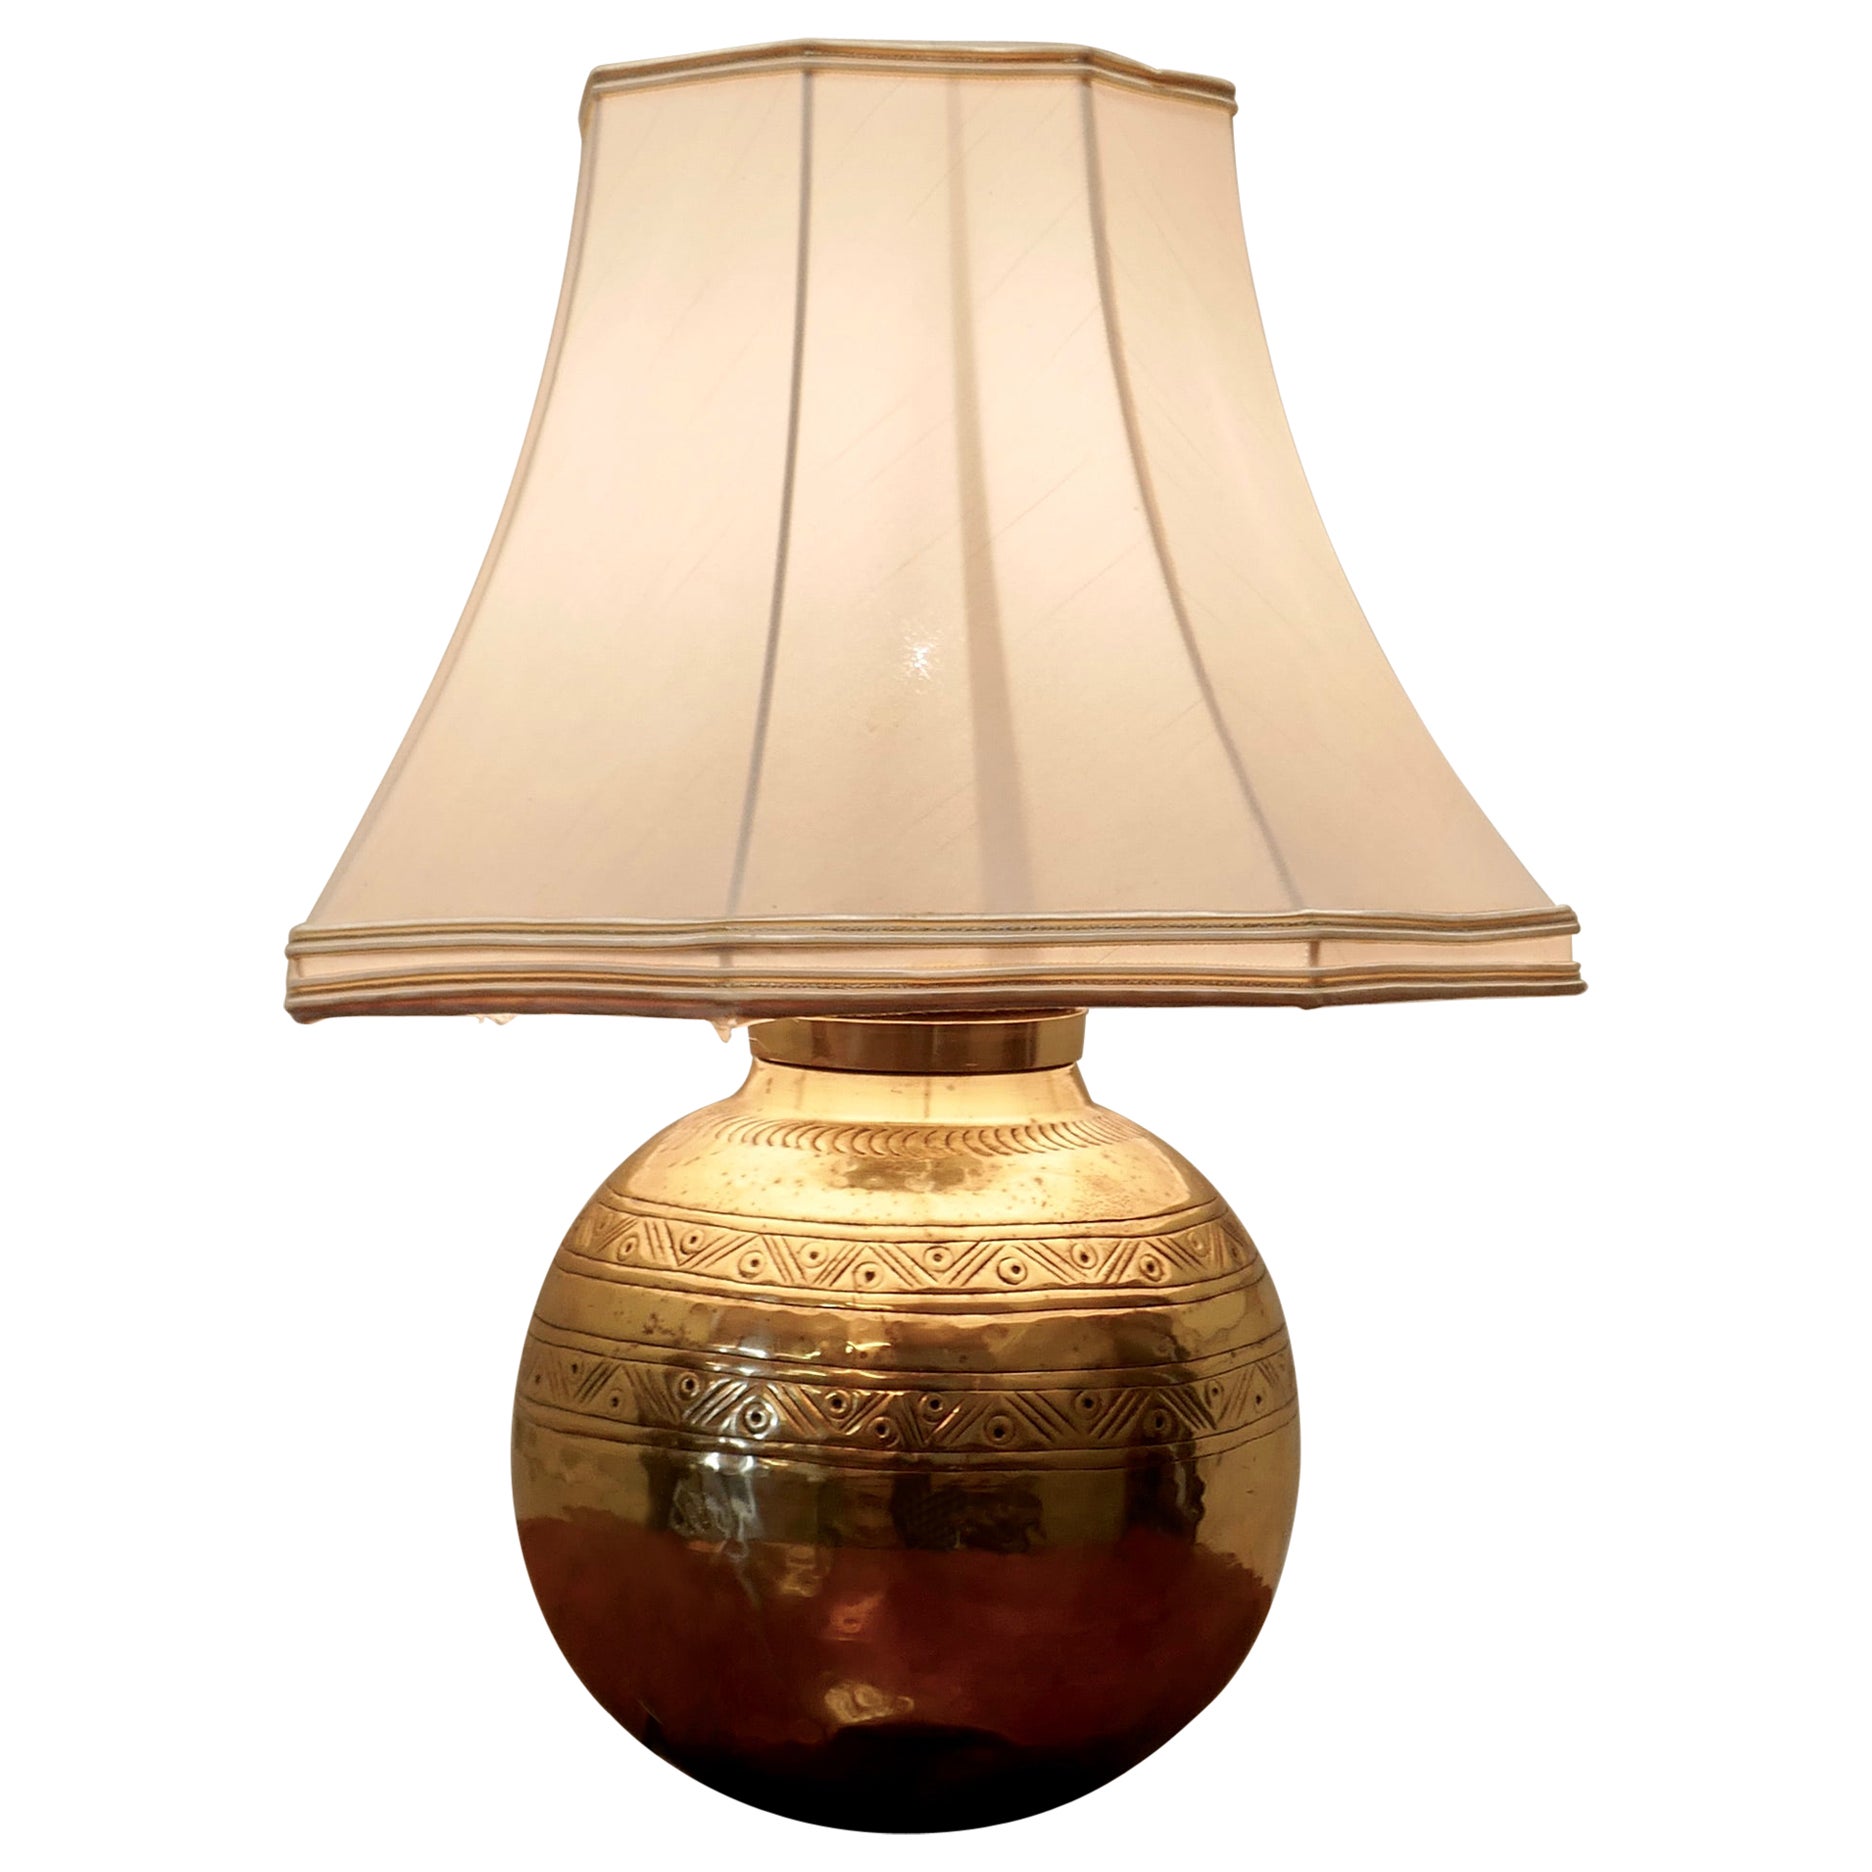 Large Brass Ball Table Lamp with Hand Beaten Decoration